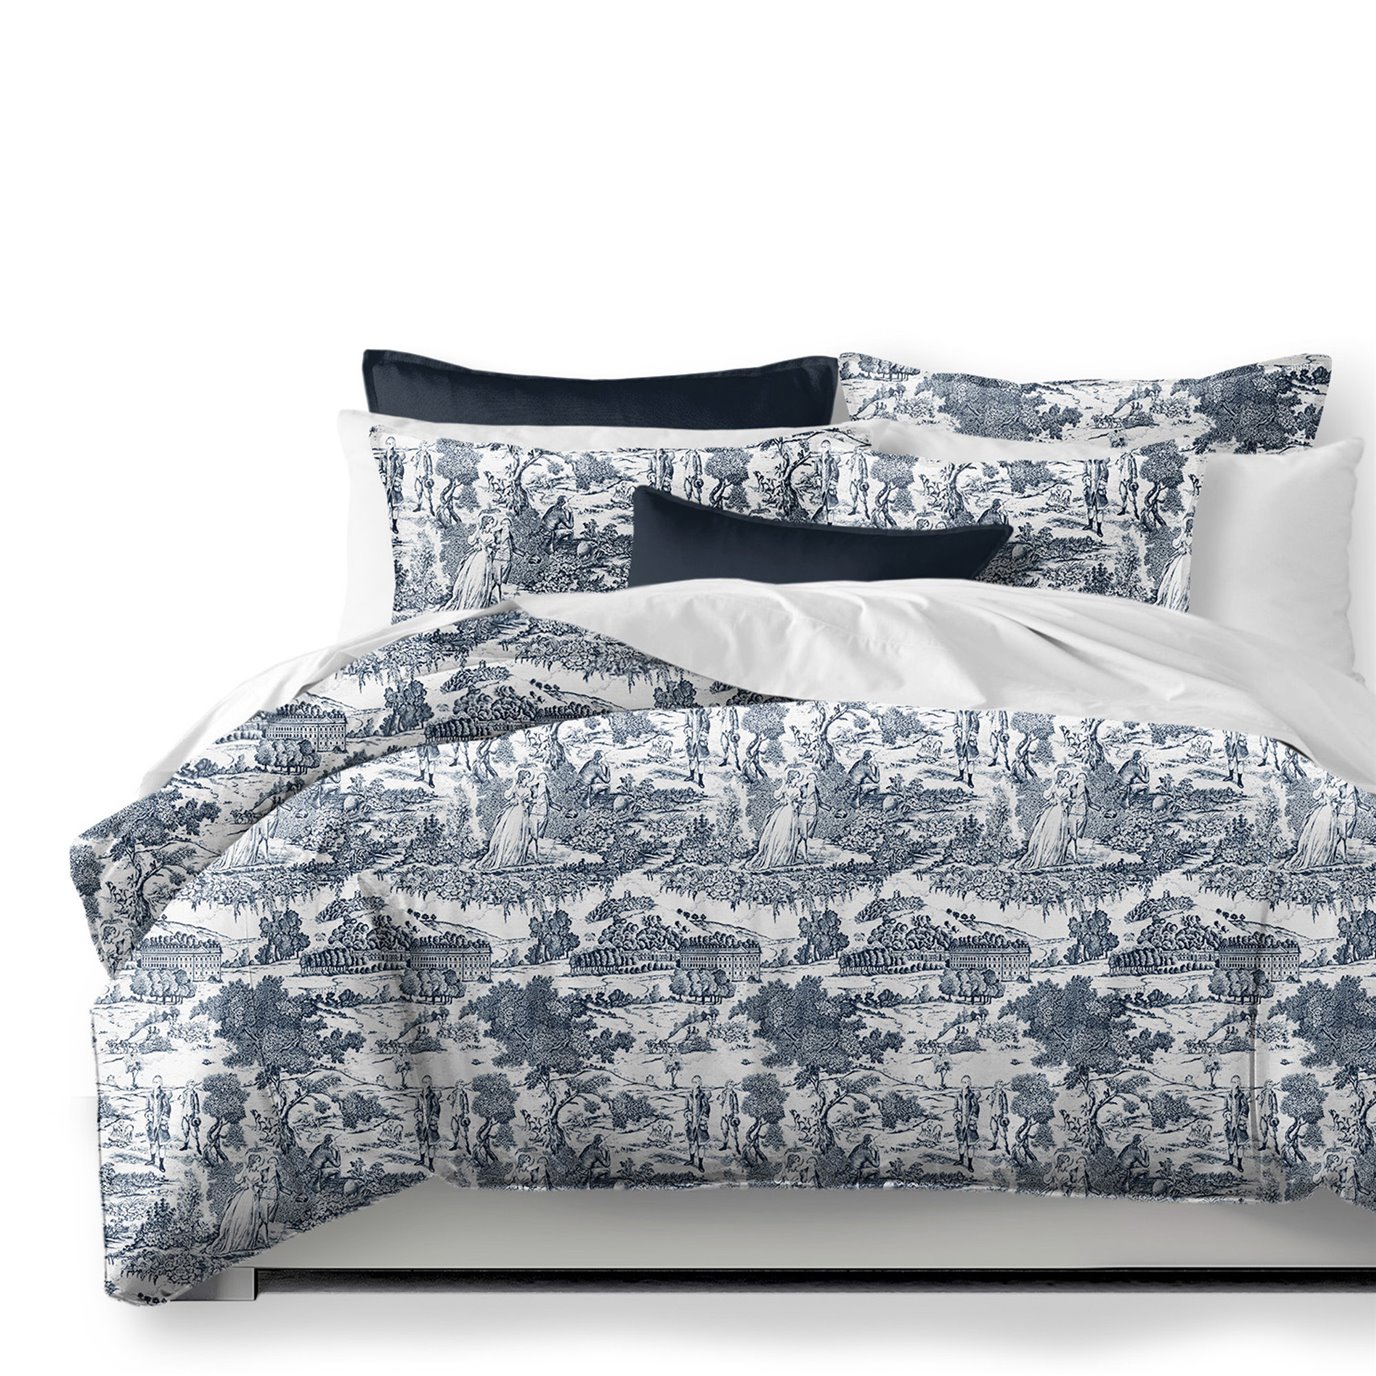 Beau Toile Blue Coverlet and Pillow Sham(s) Set - Size Full